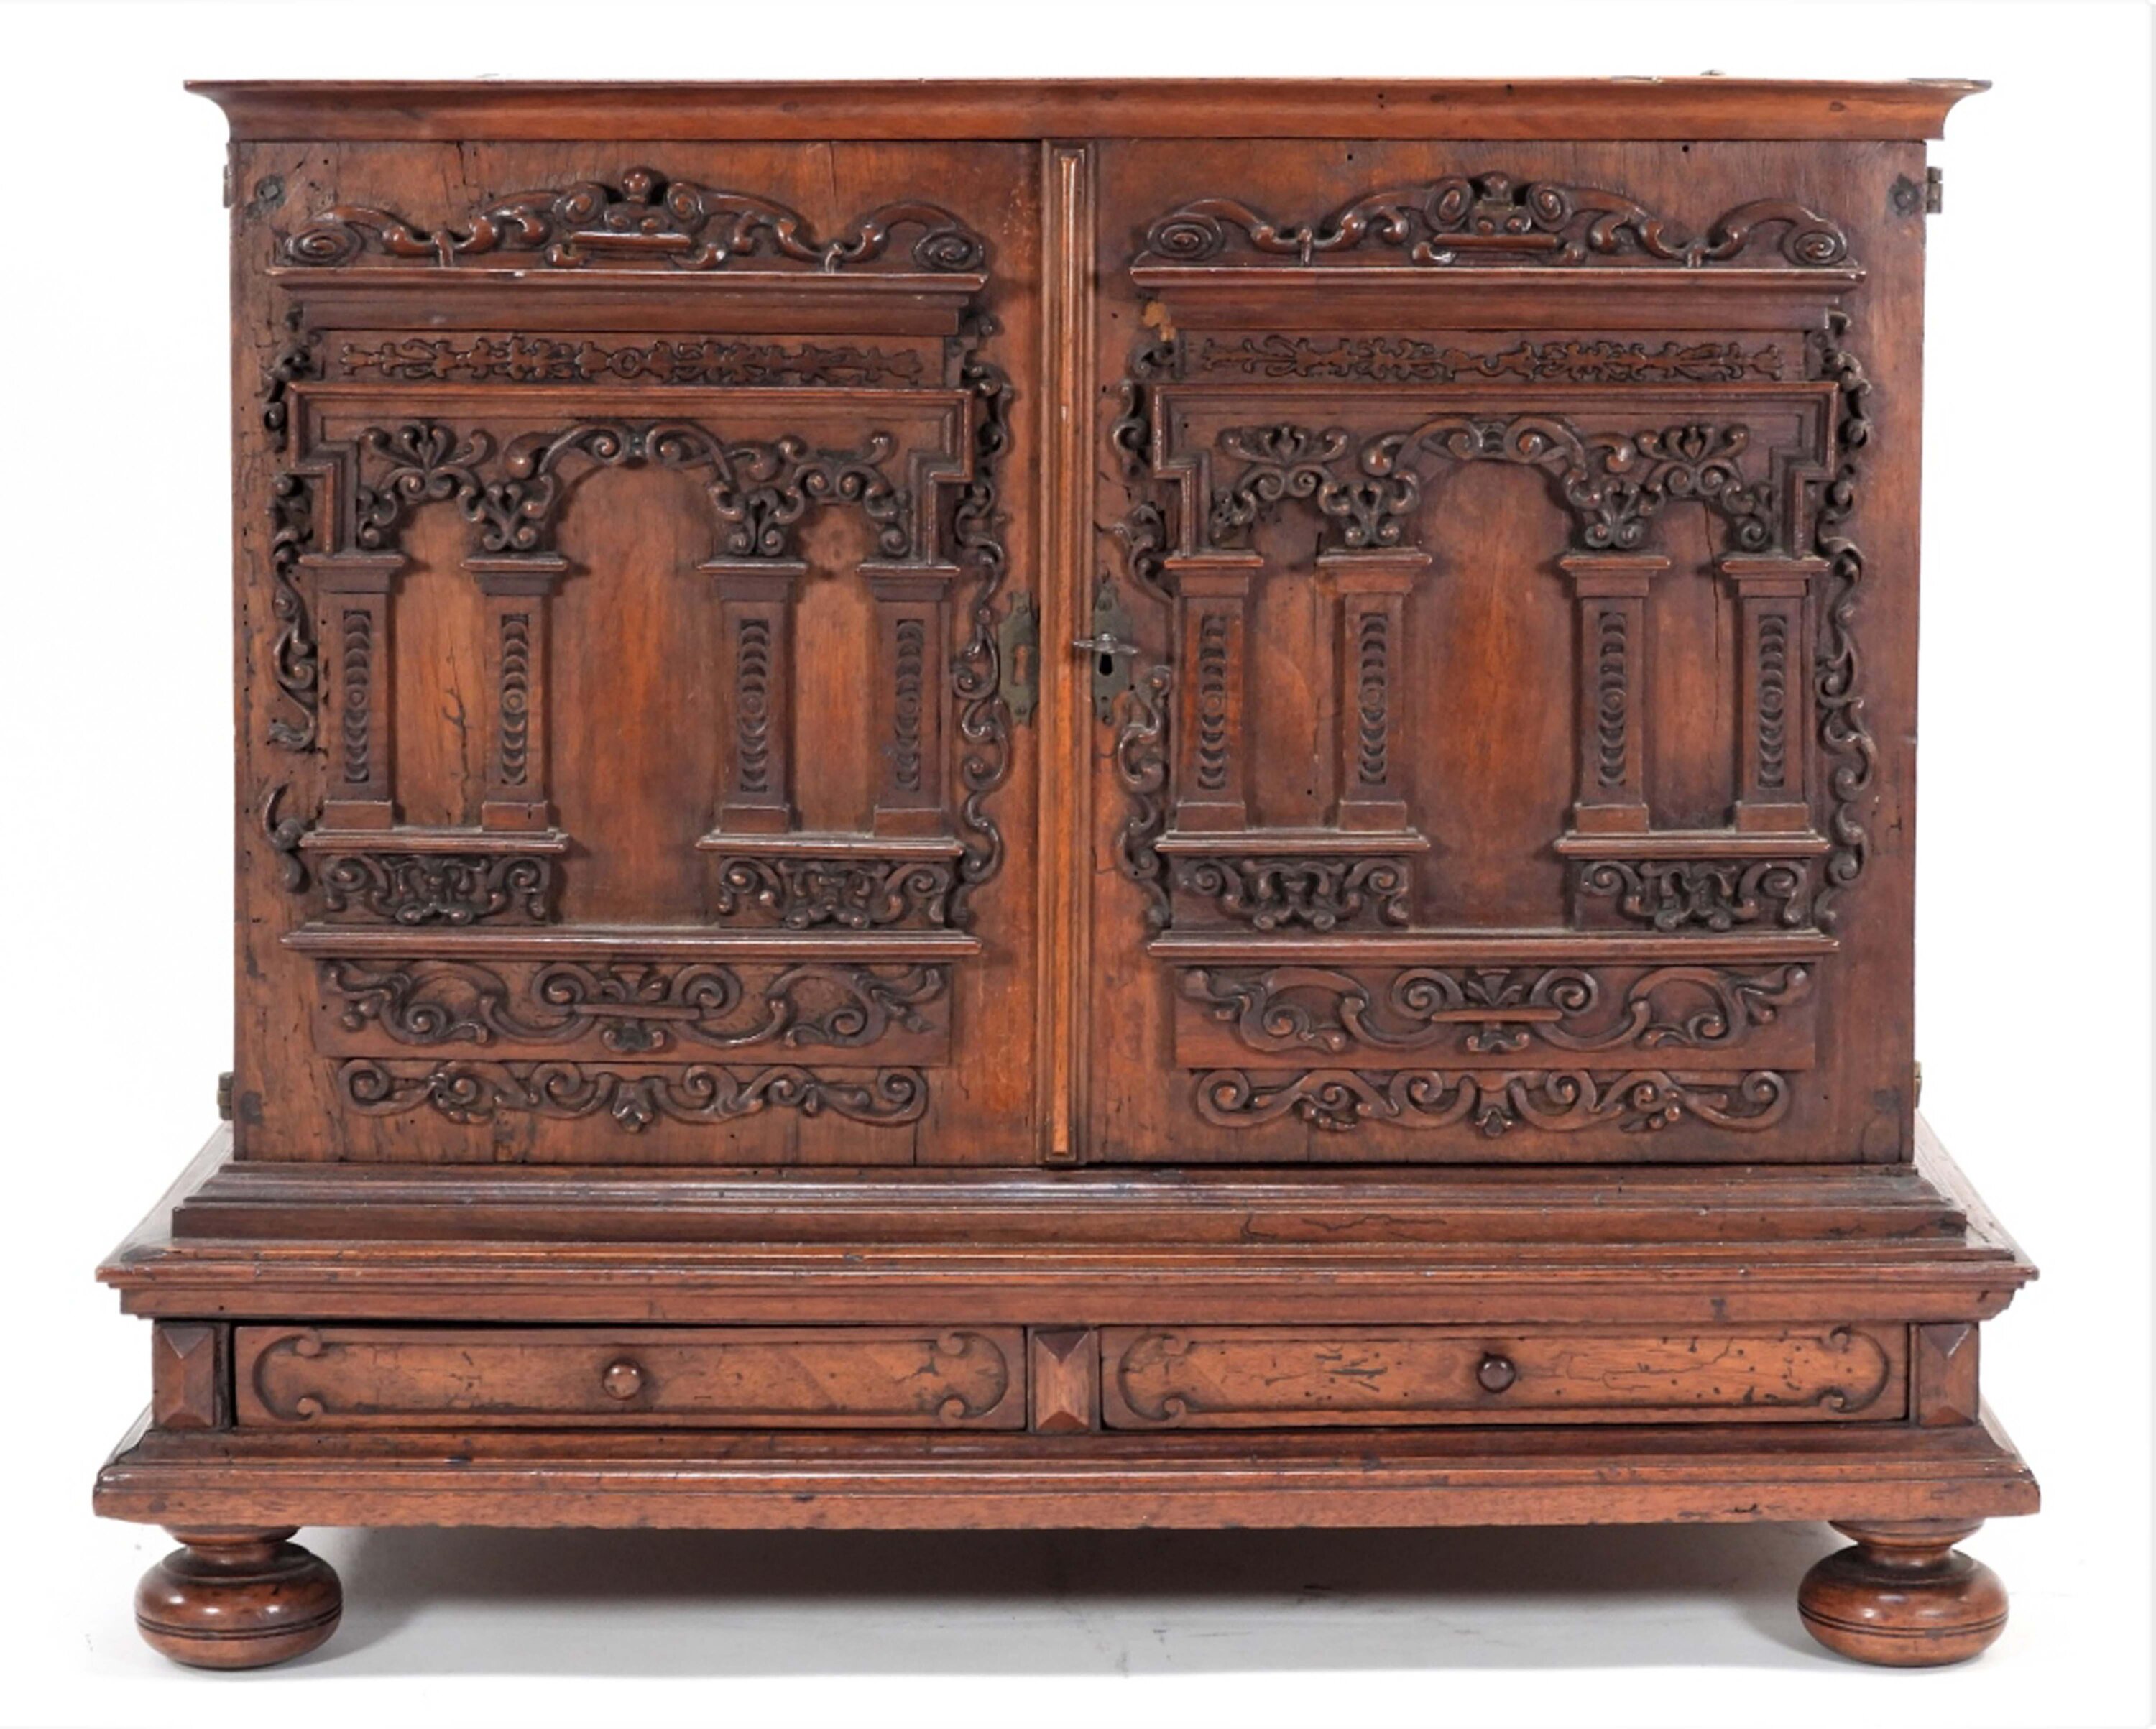 South German marquetry penwork table cabinet, est. $2,500-$4,000